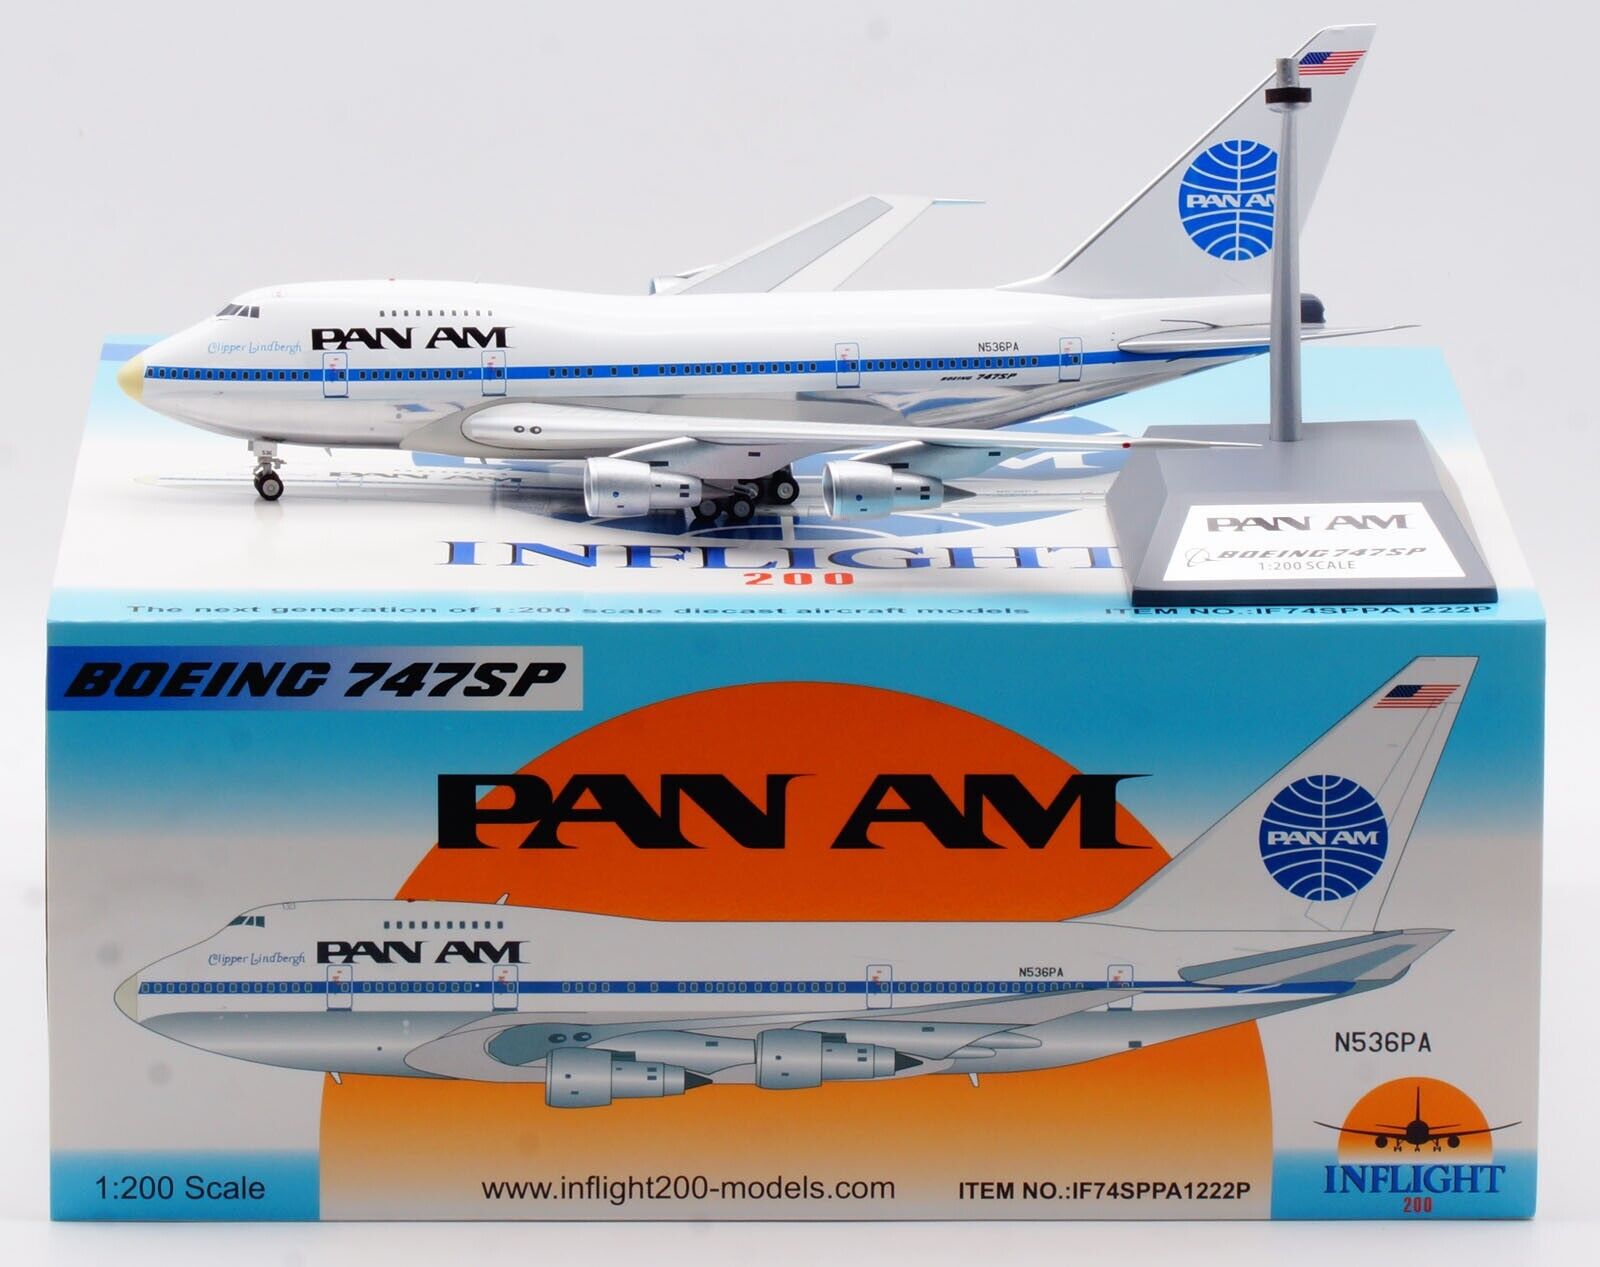 INFLIGHT 1:200 PAN AM Boeing B747SP Diecast Aircraft Jet Model N536PA With Stand